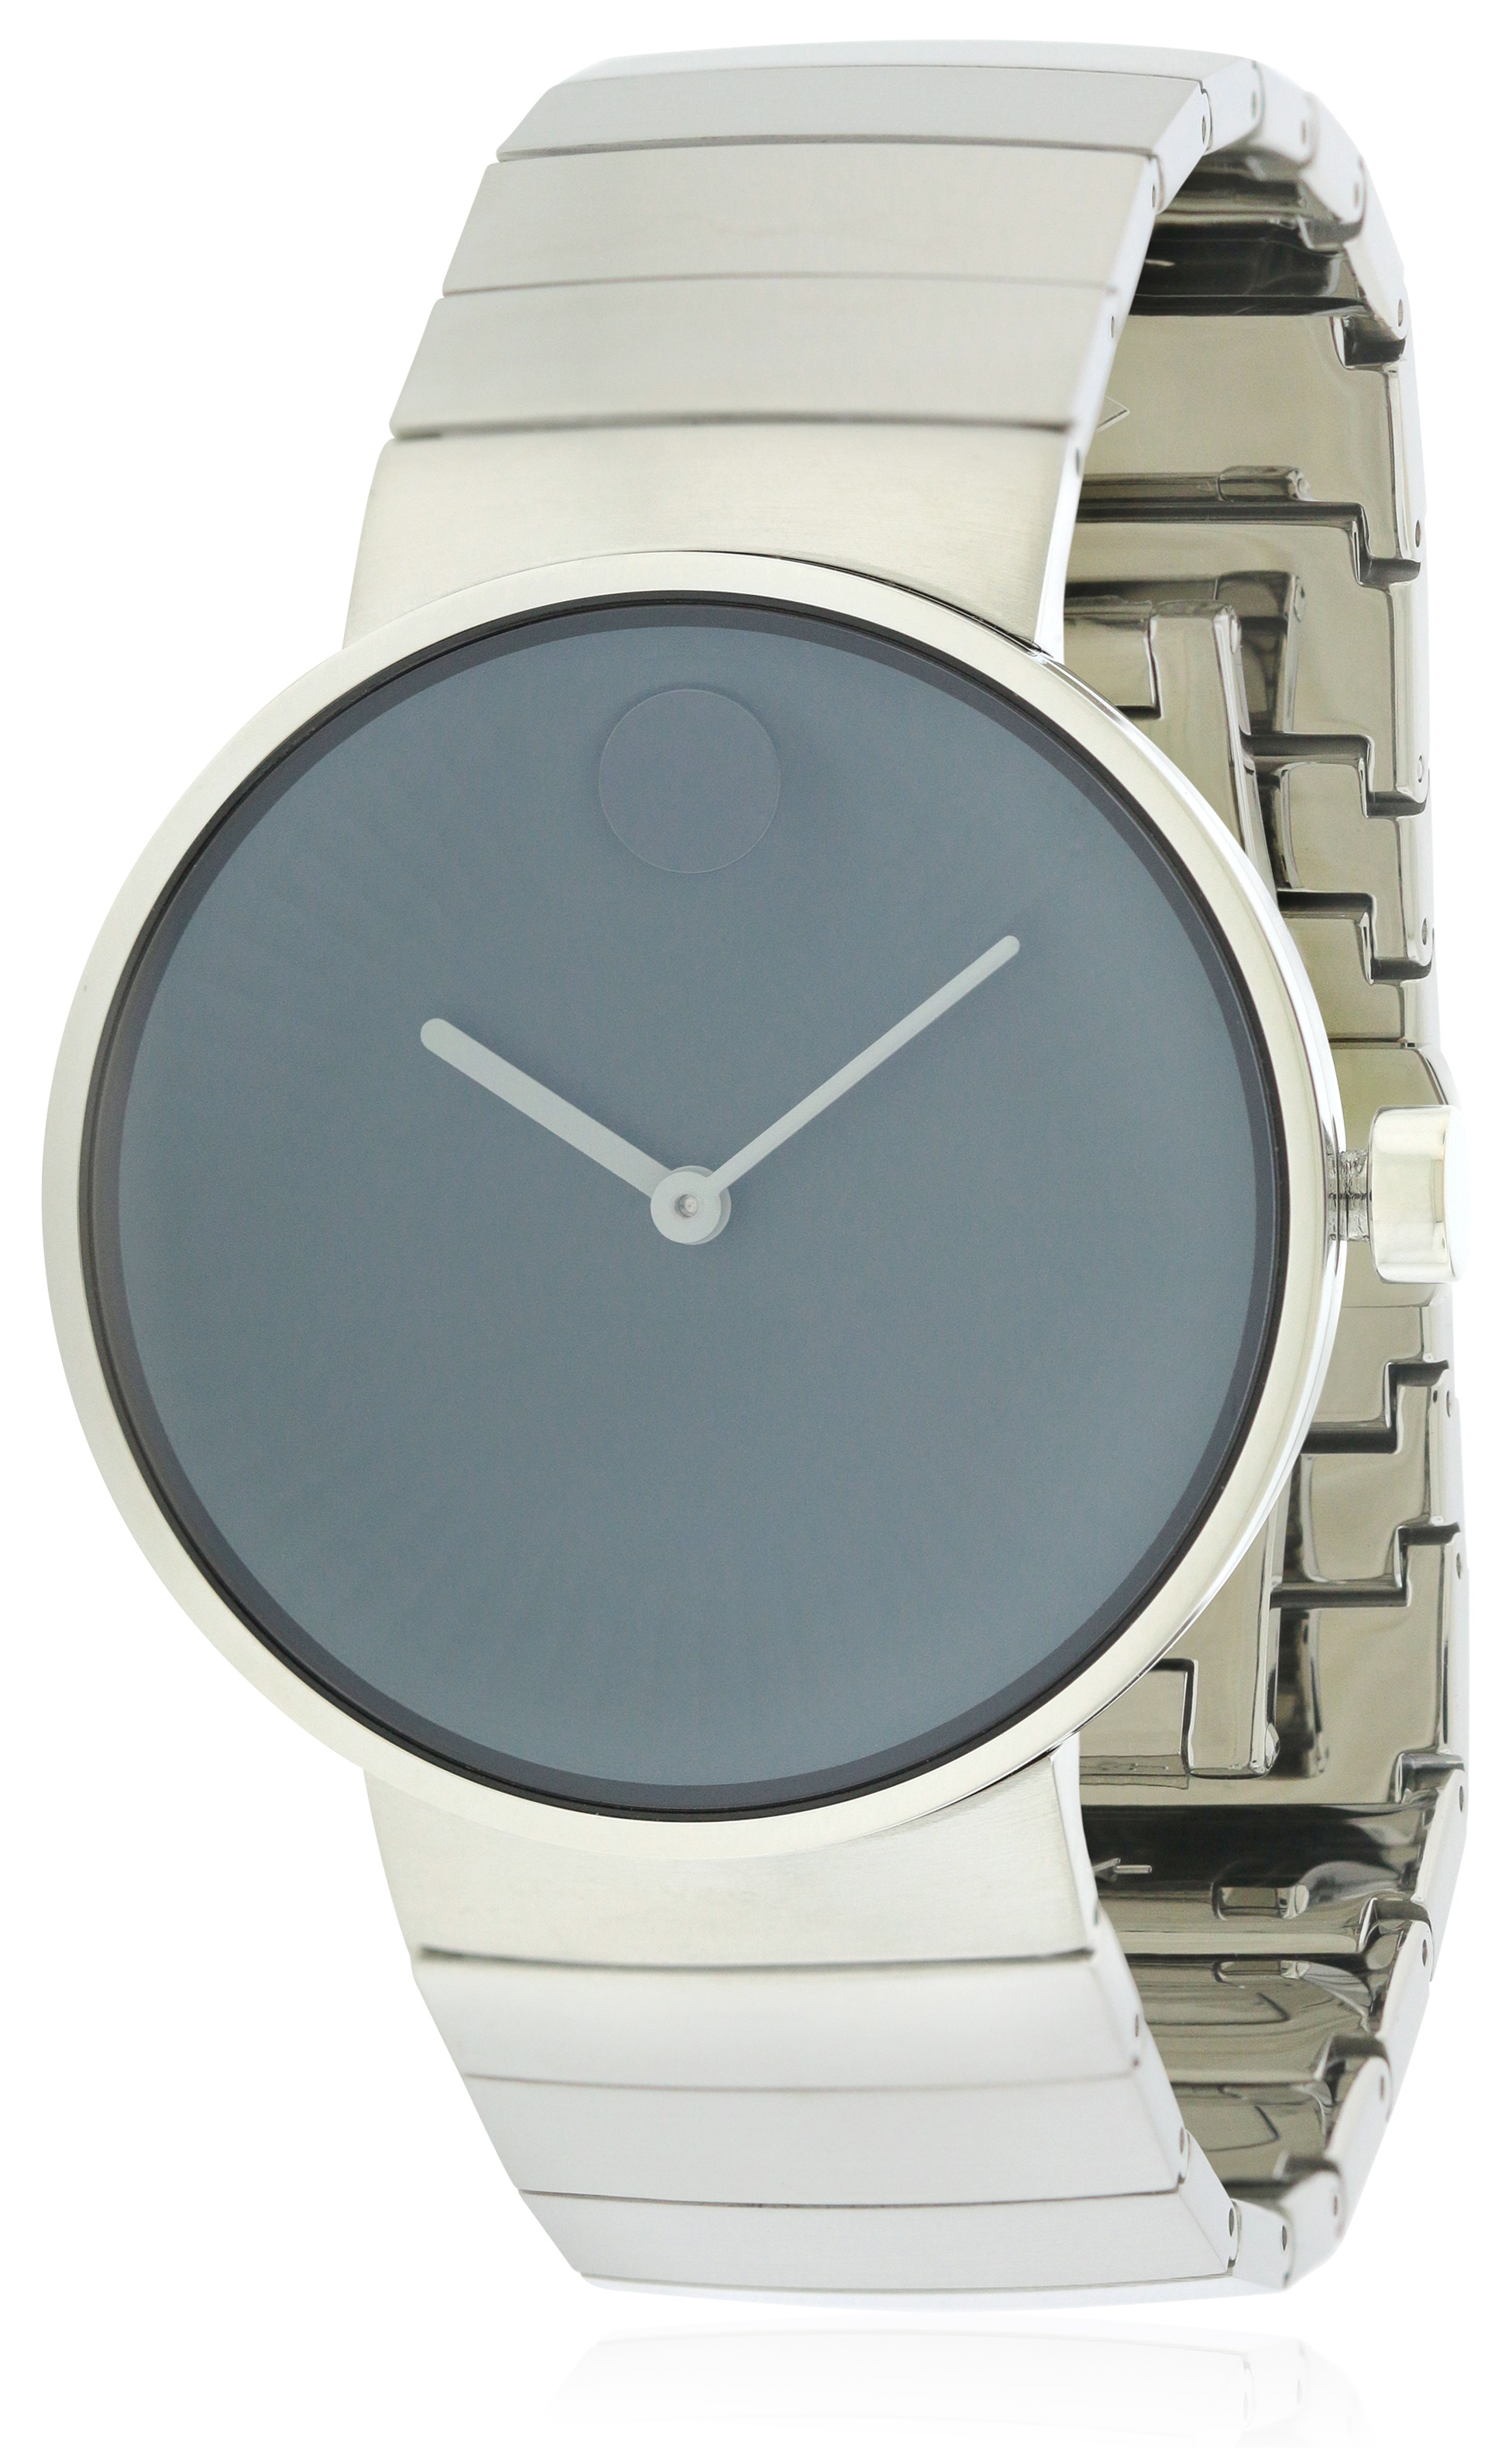 Movado Edge Stainless Steel Mens Watch 3680006 - (Open Box)